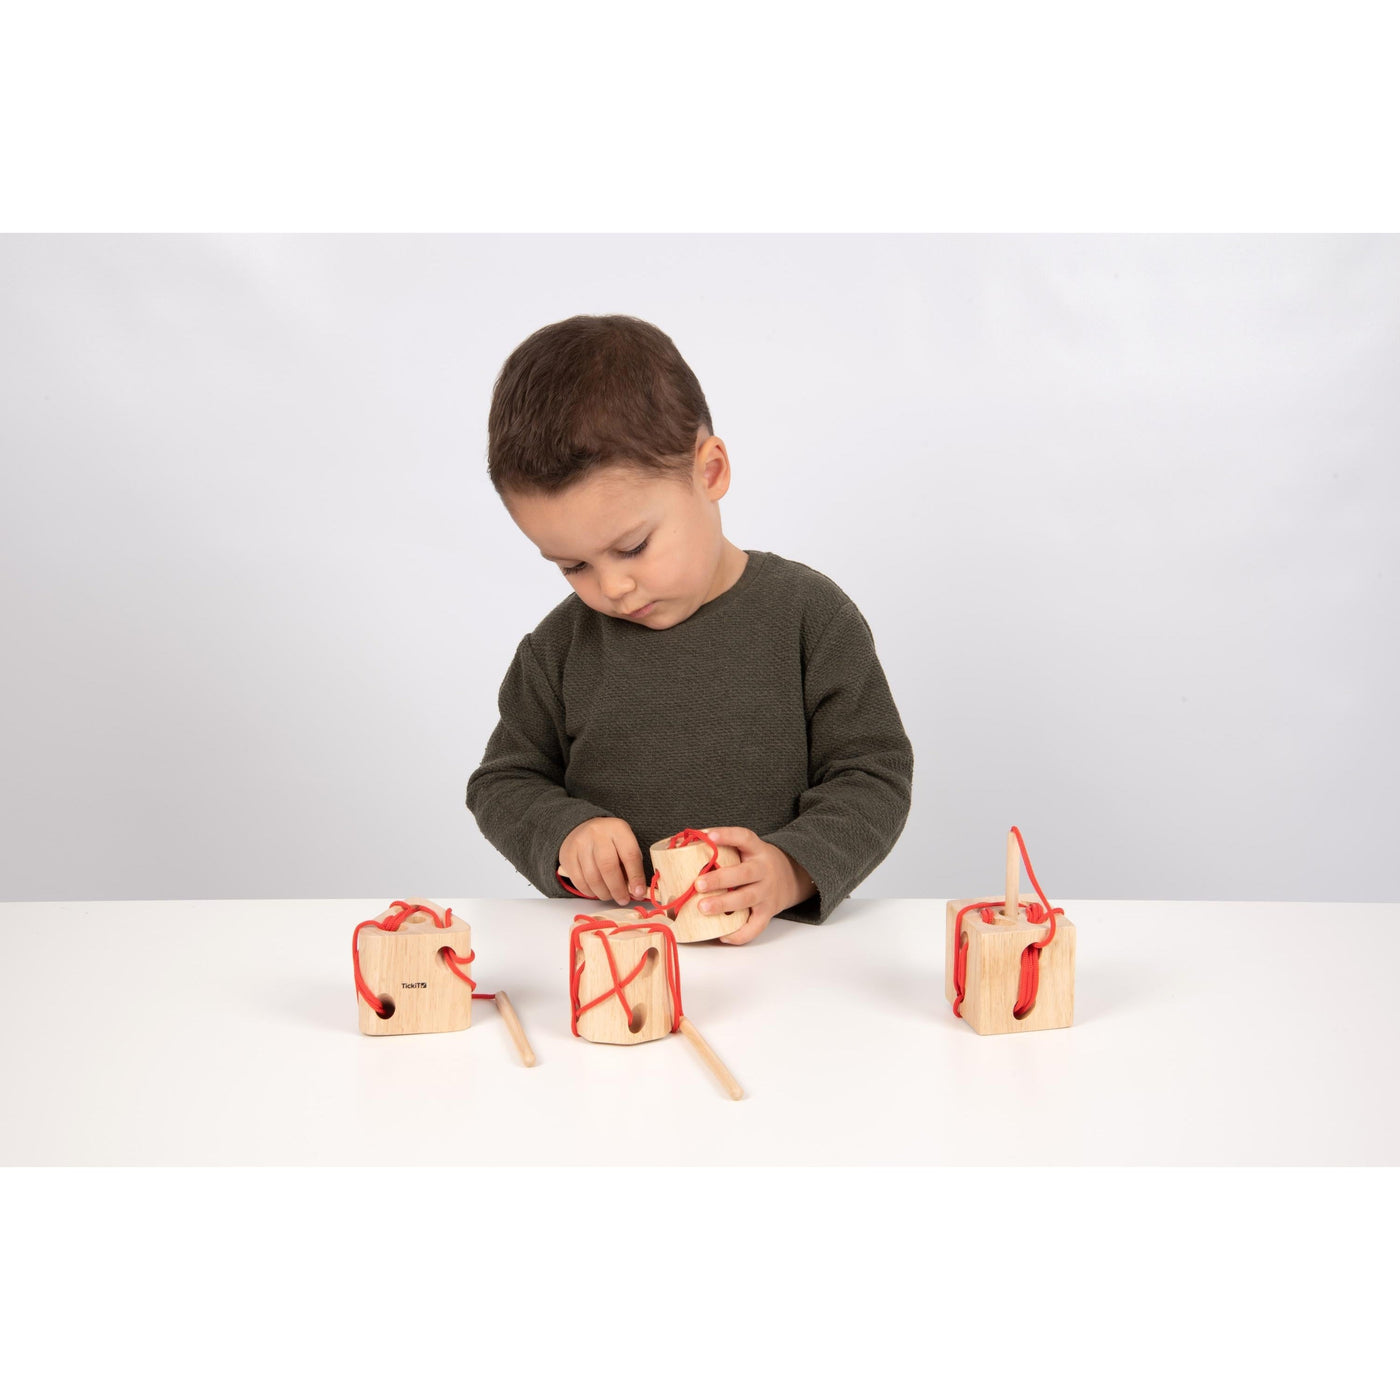 TickiT Wooden Lacing Shapes - Pack of 4